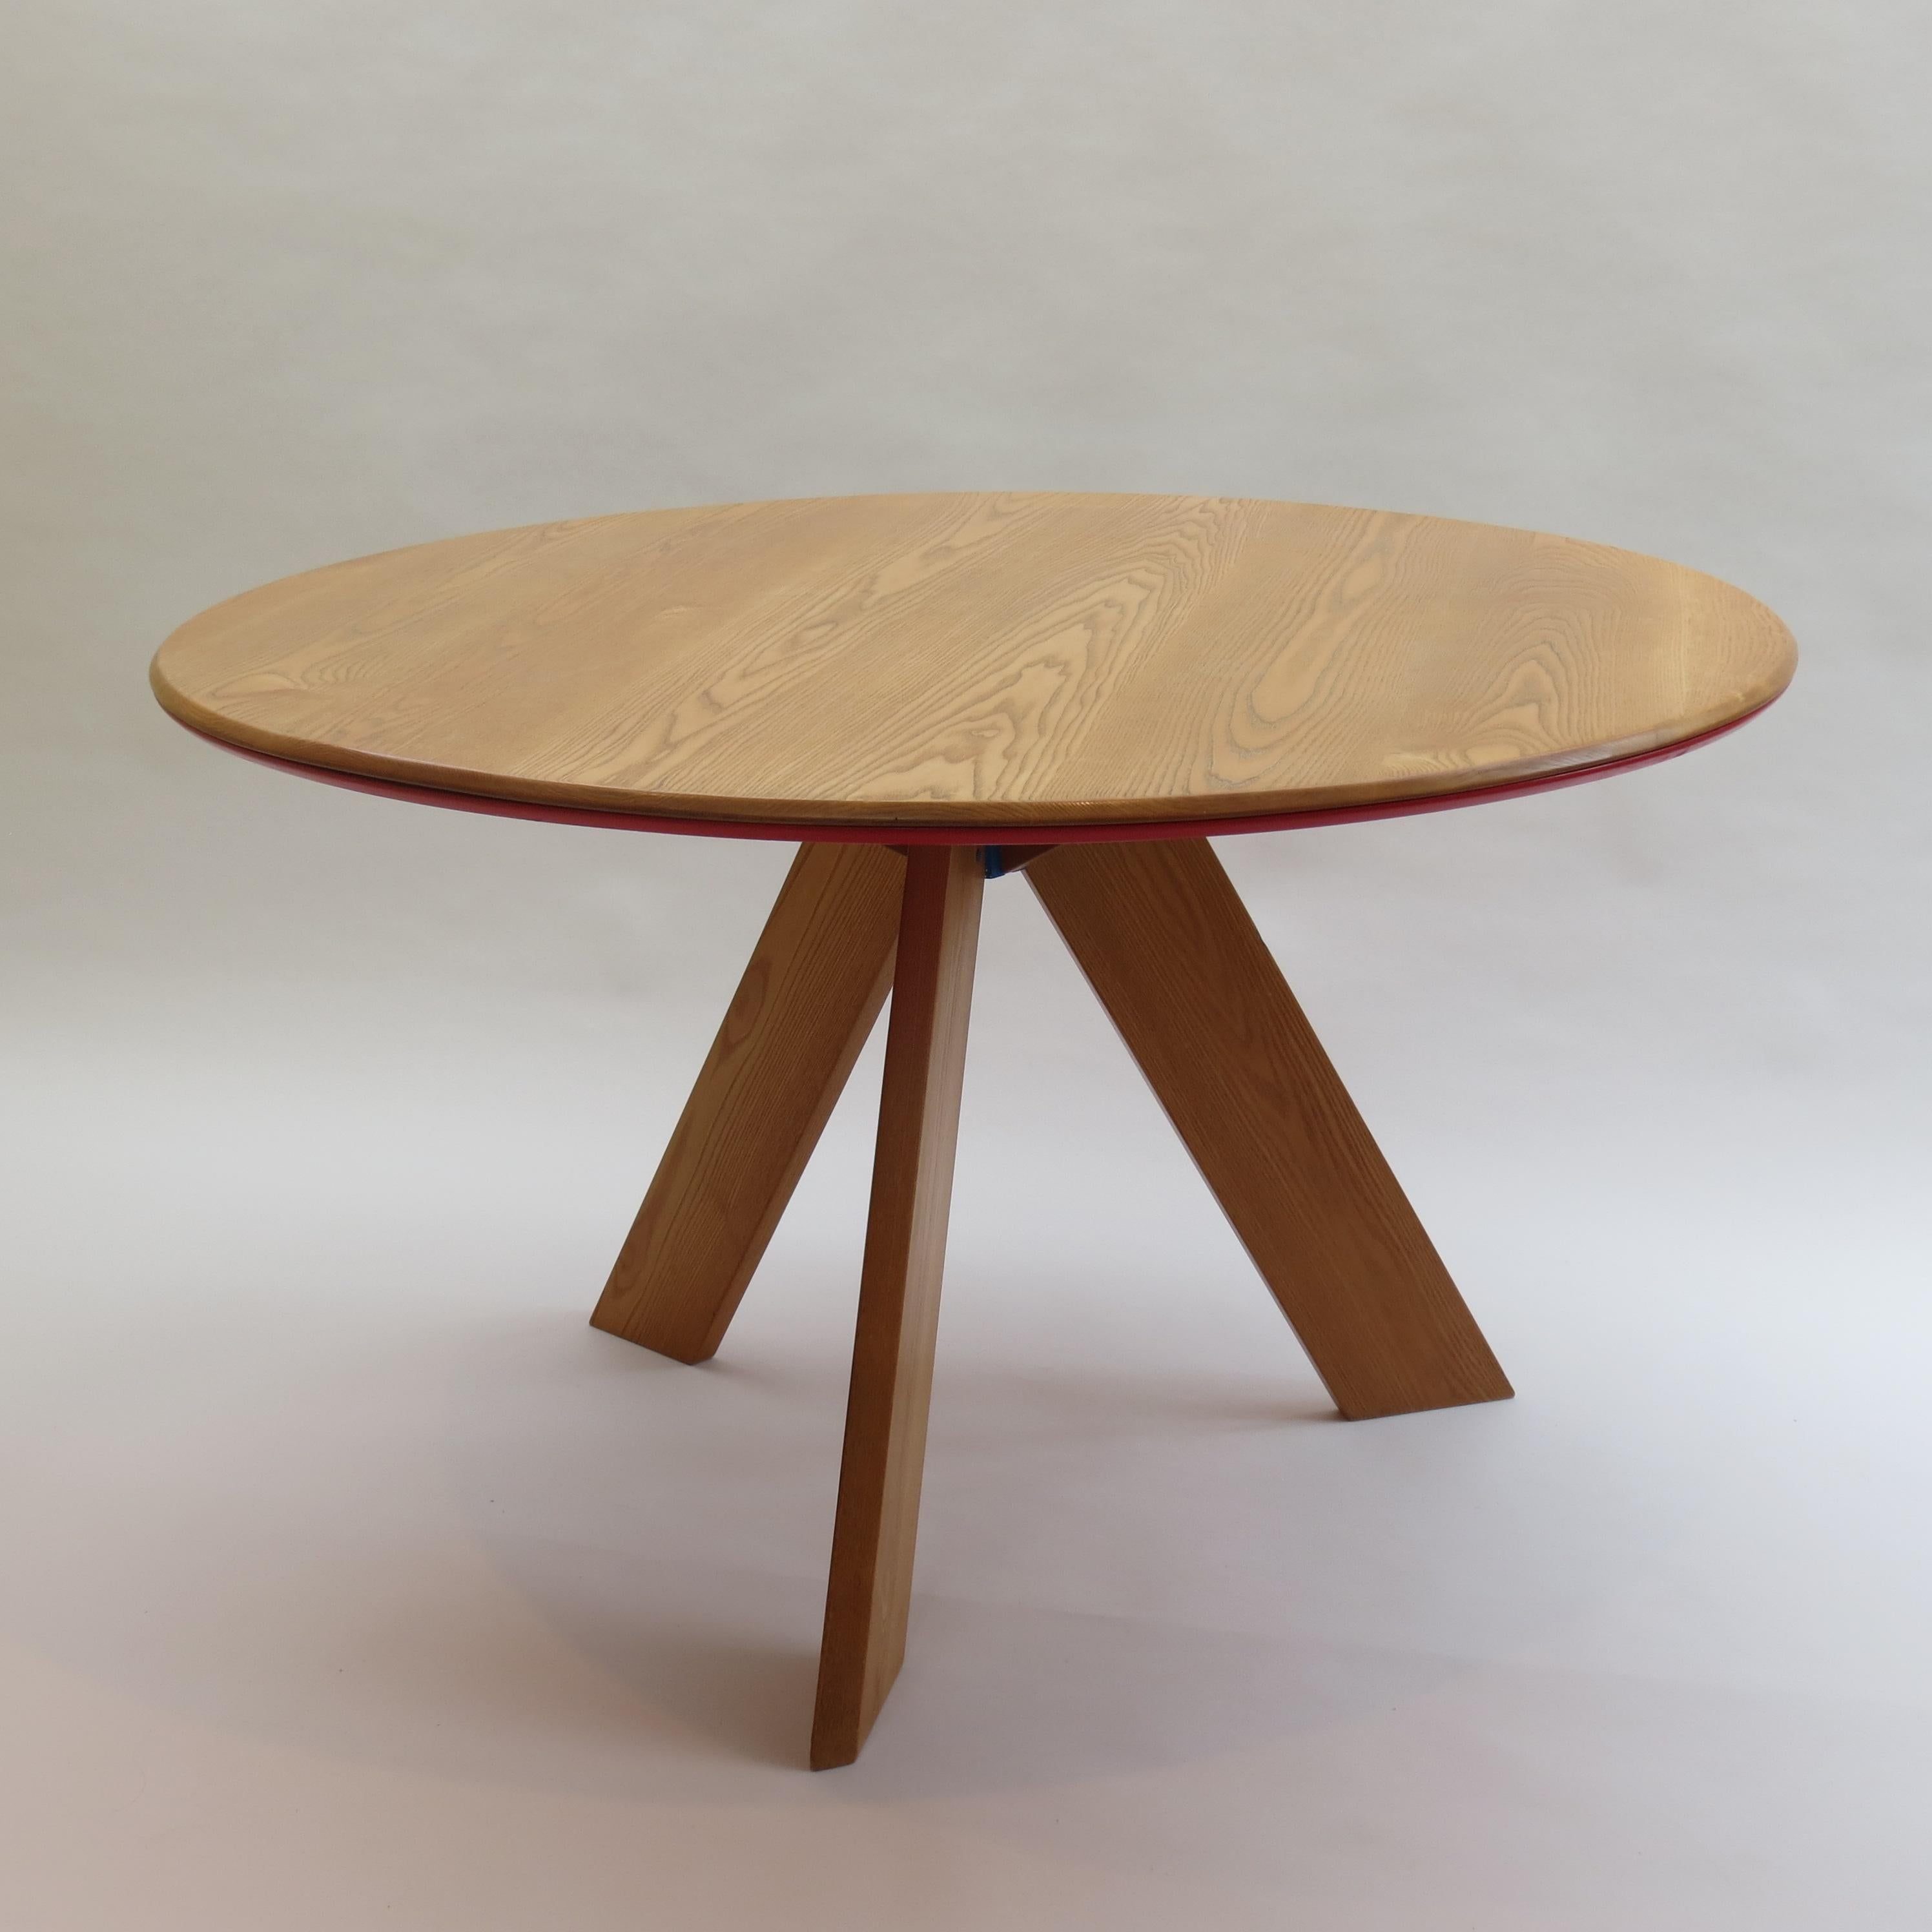 Midcentury Bespoke Round Dining Table by David Field 1980s with Red Blue Detail 7